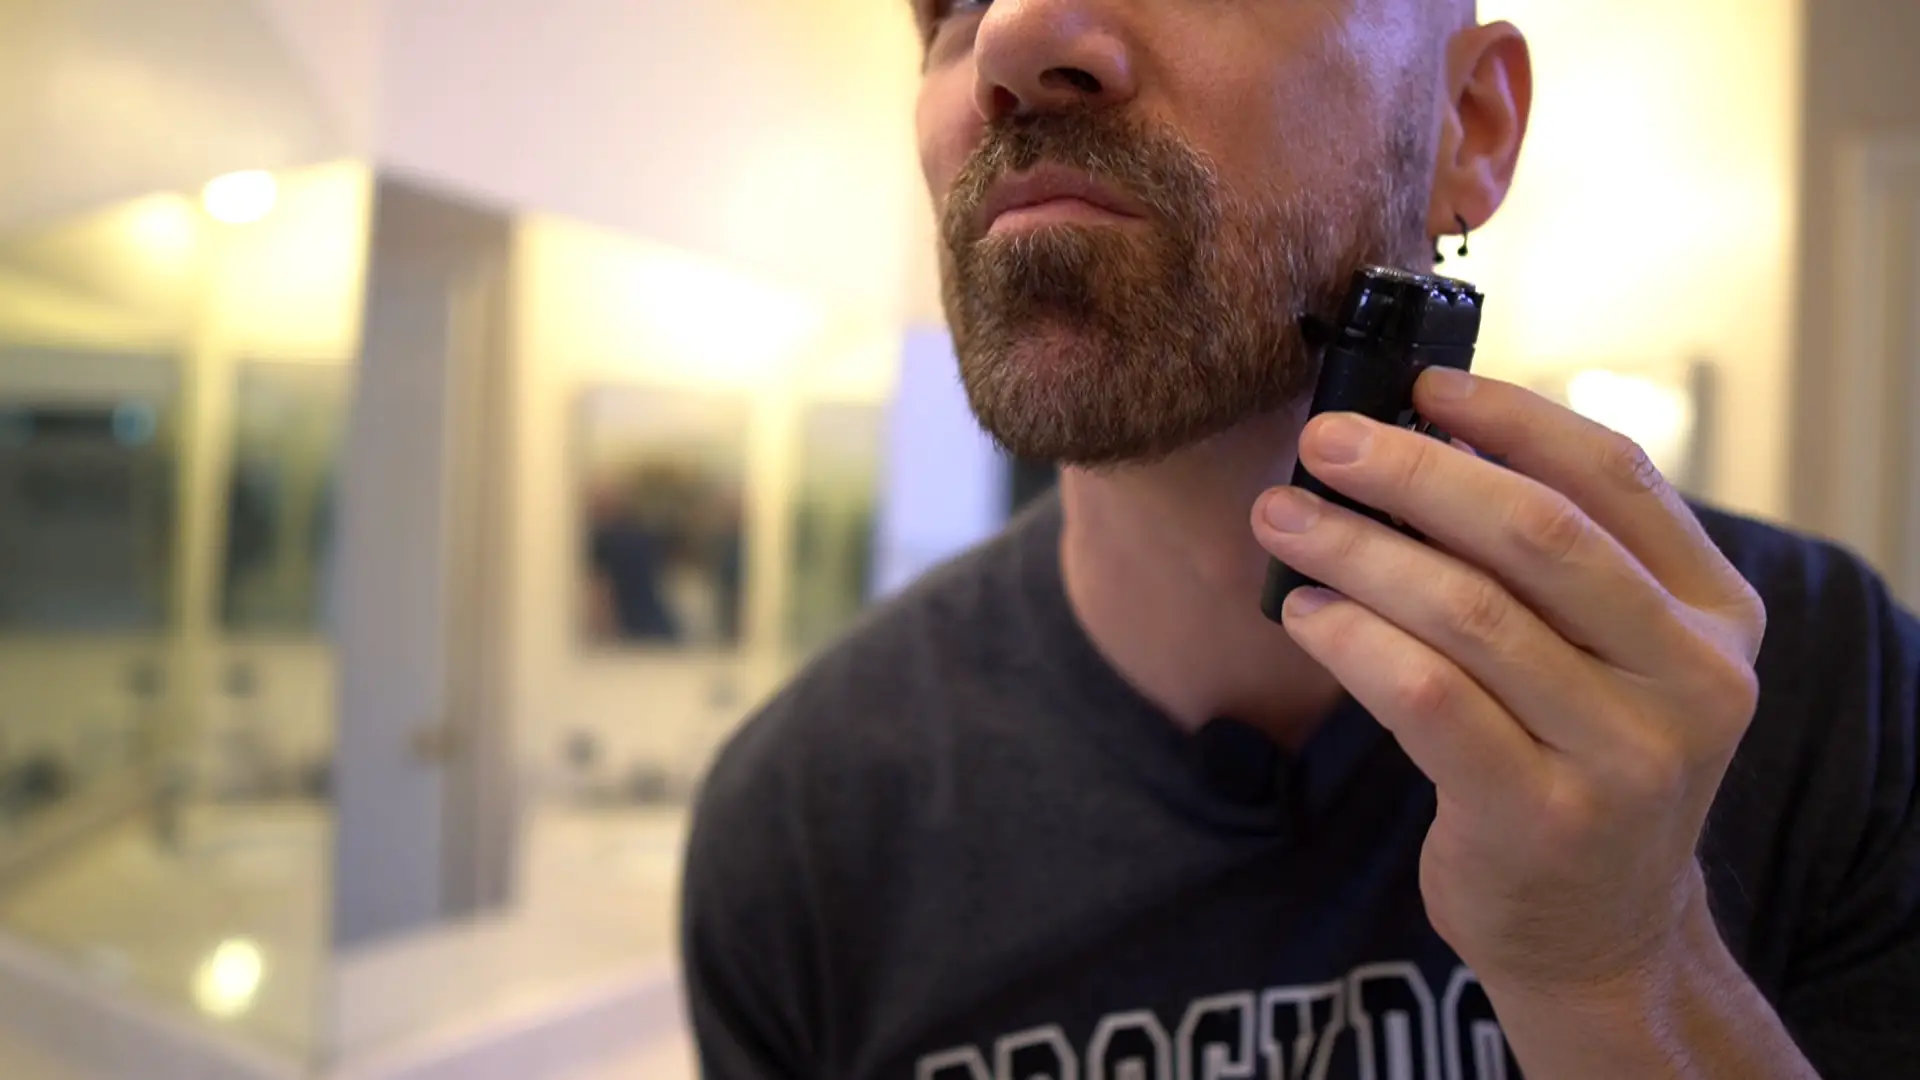 Tac Shaver Review: Does This As Seen on TV Razor Work? – Freakin' Reviews